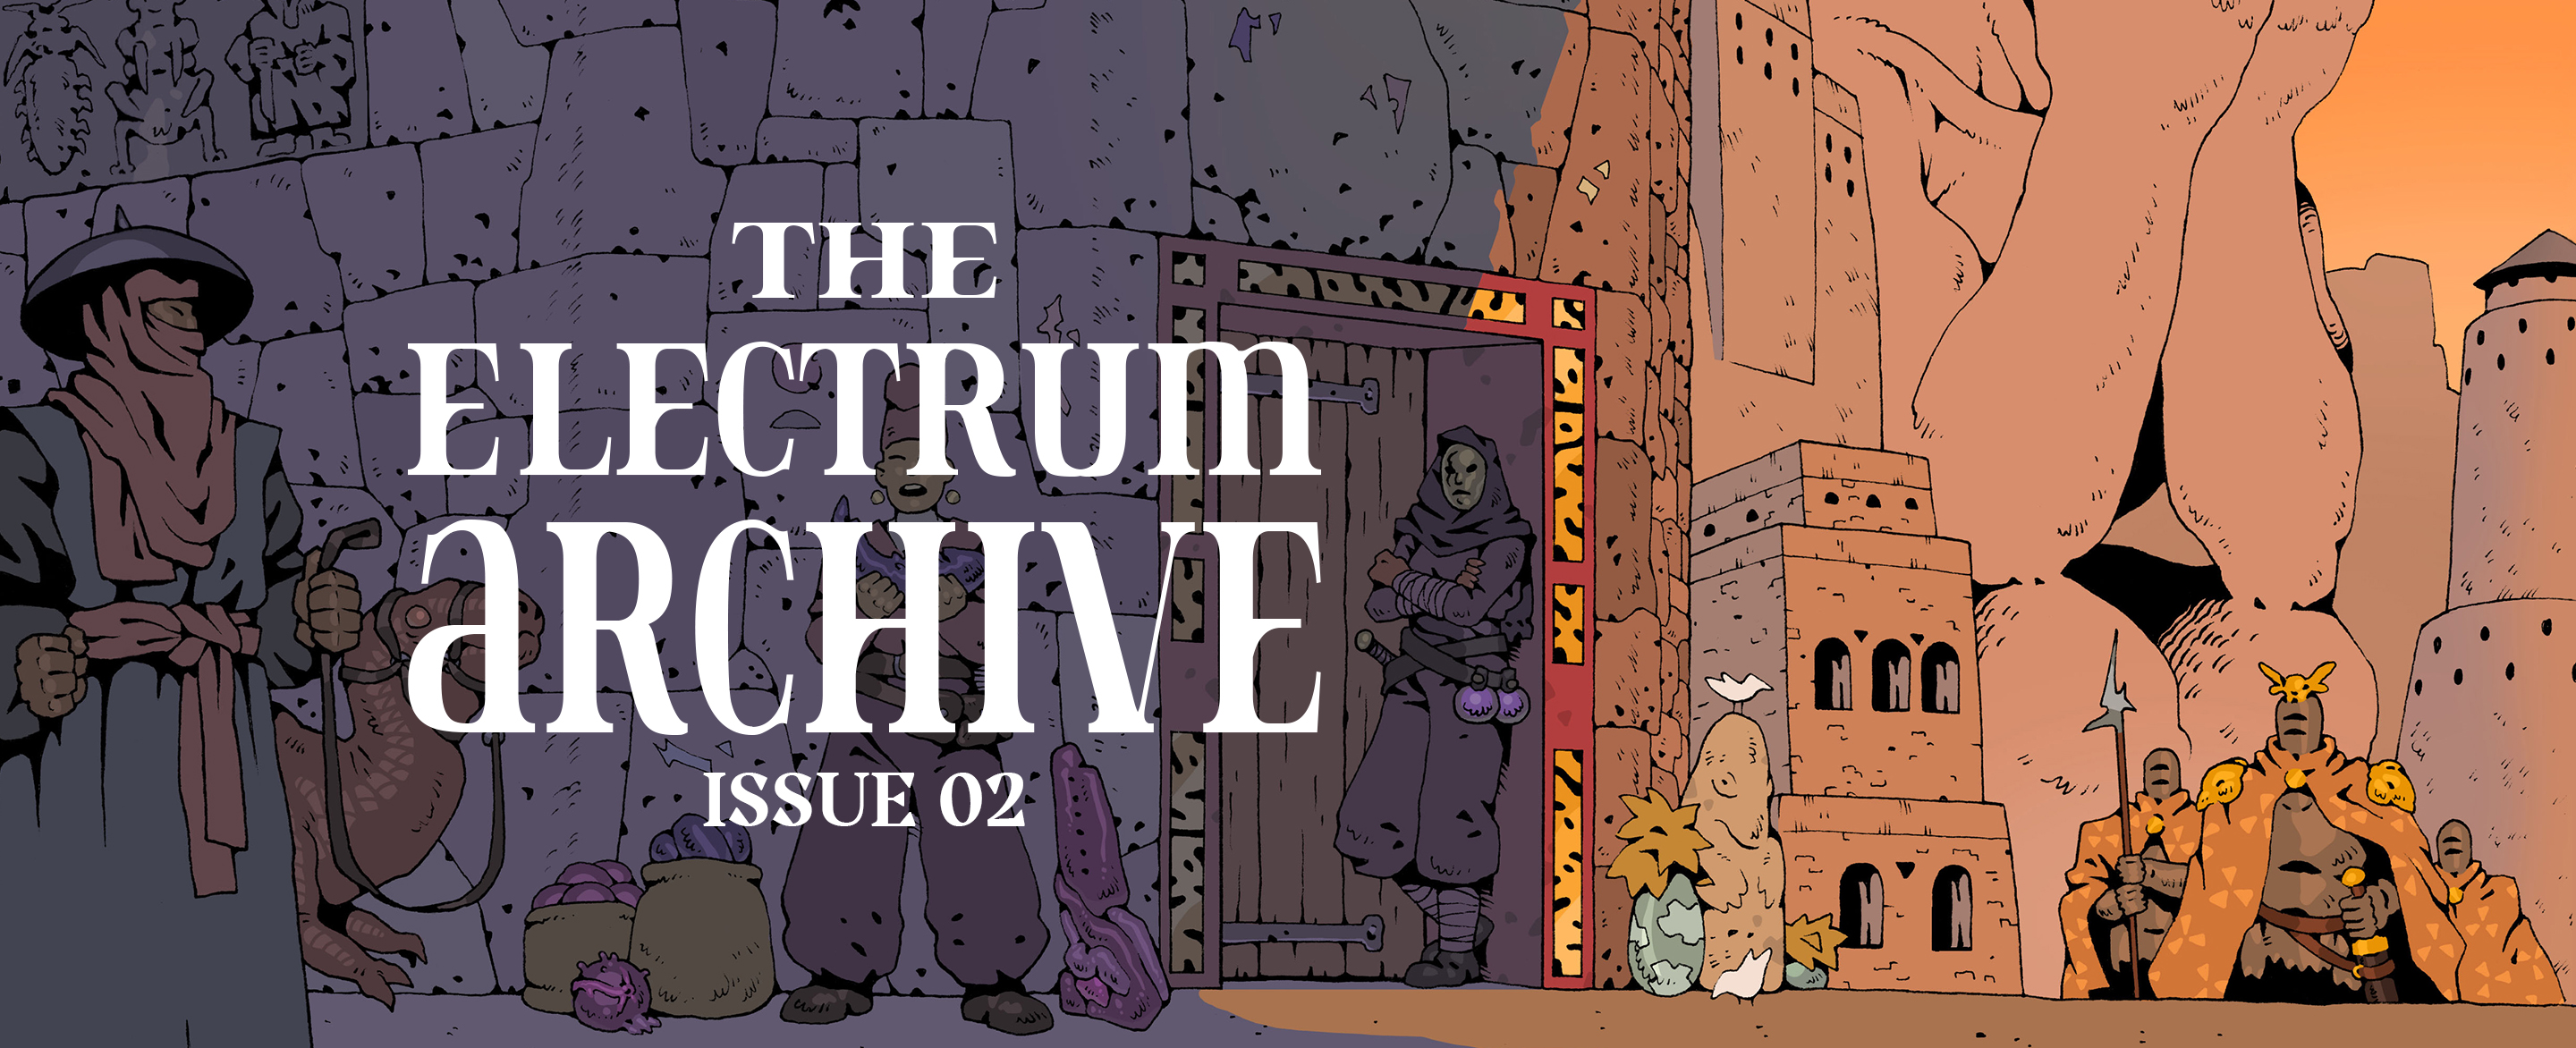 The Electrum Archive - Issue 02